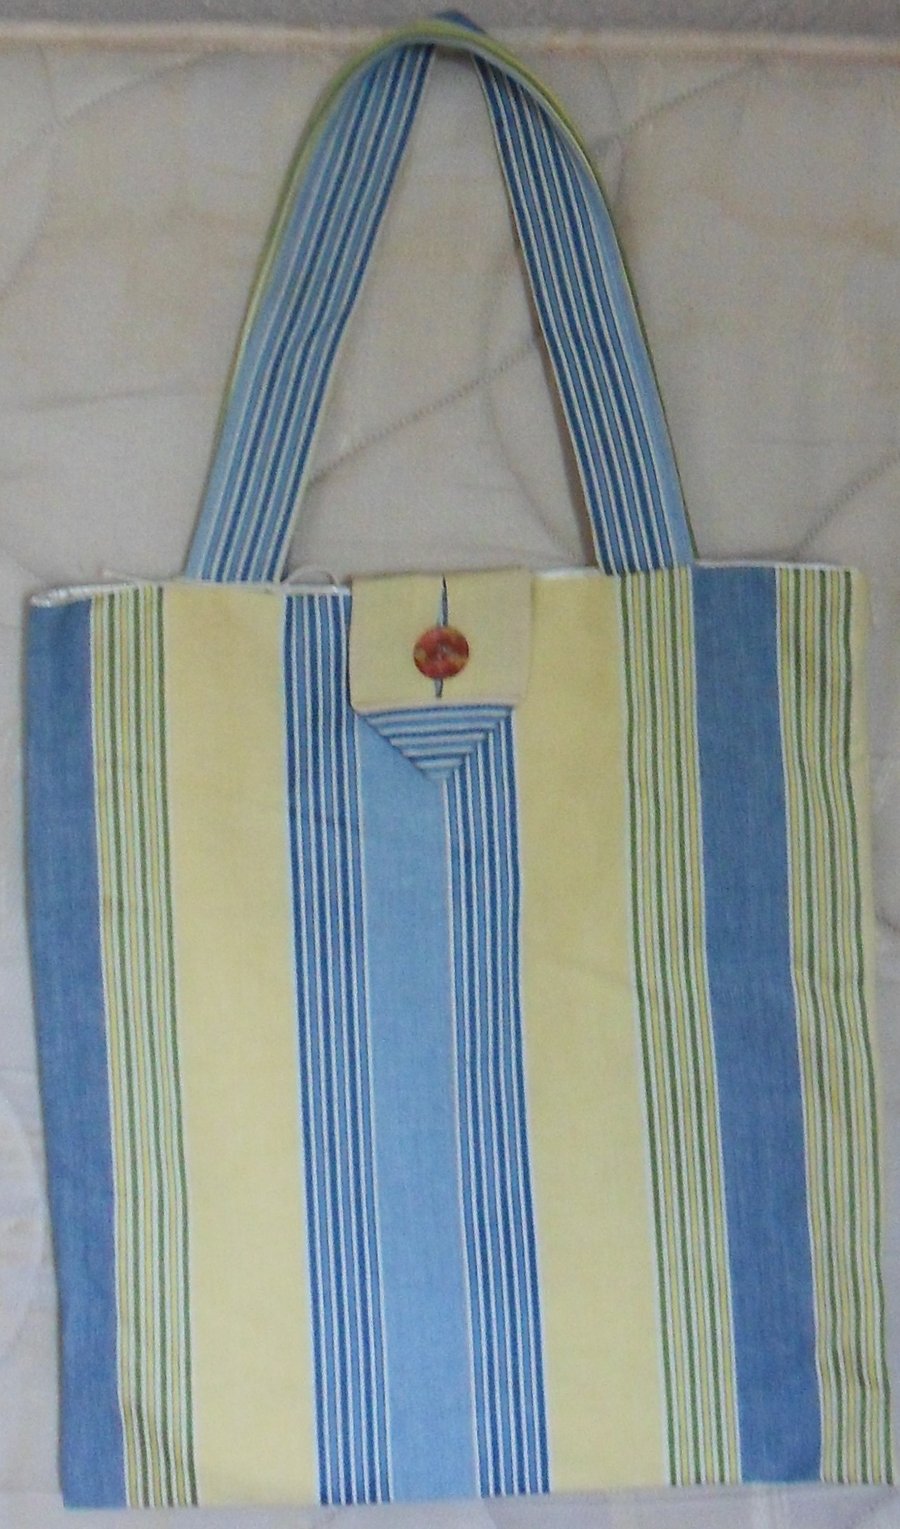 Homemade tote bag. Blue, yellow strip.  Approx measures 15" x 16 half"